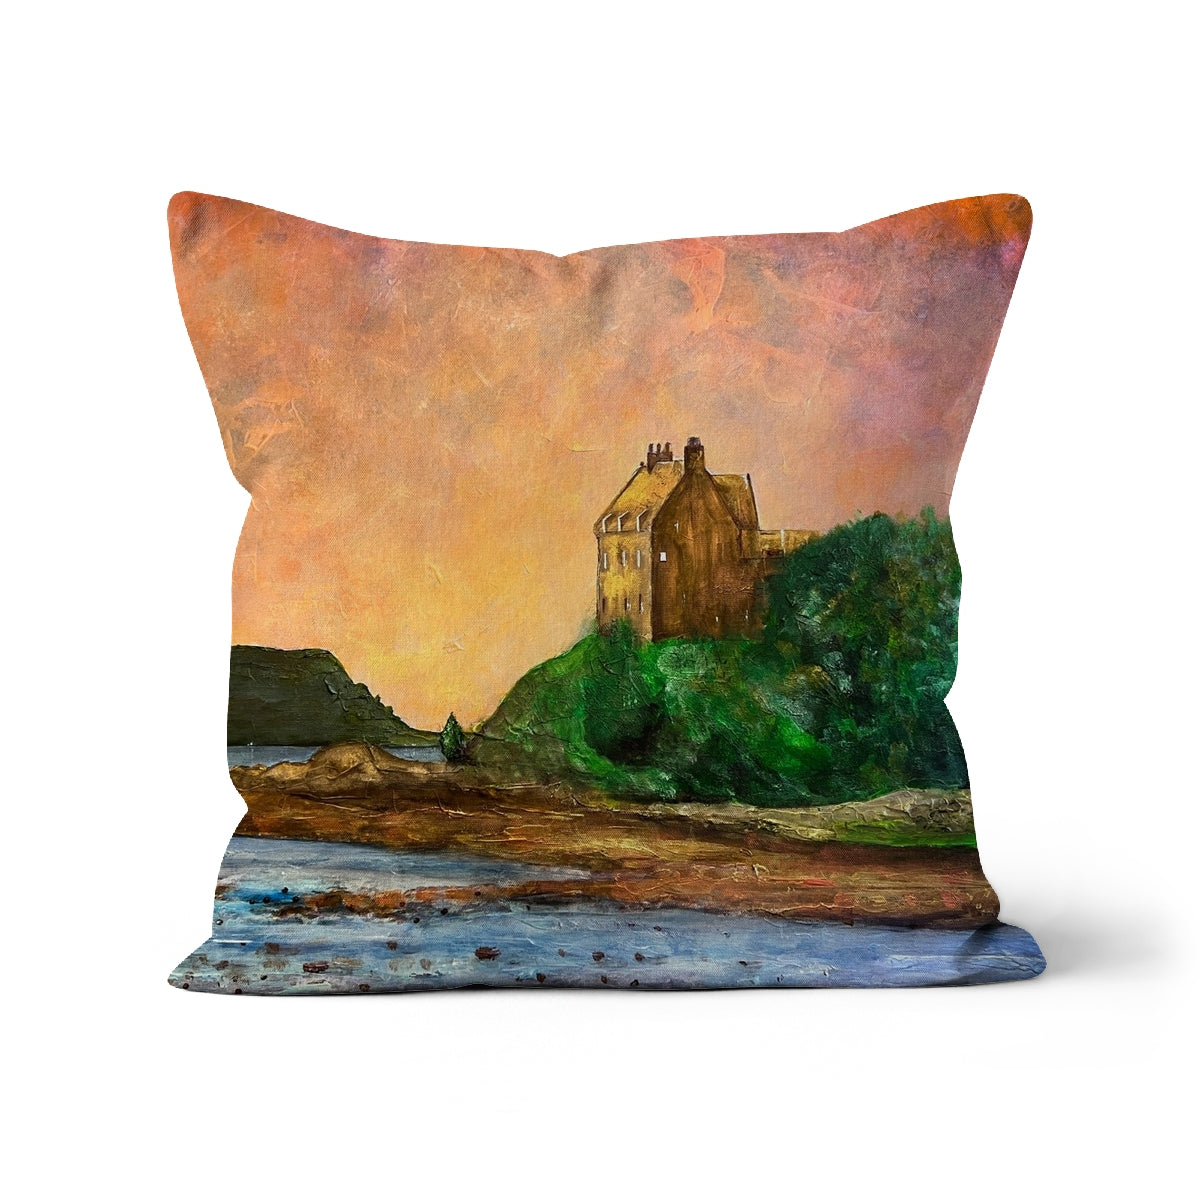 Duntrune Castle Art Gifts Cushion-Cushions-Historic & Iconic Scotland Art Gallery-Linen-12"x12"-Paintings, Prints, Homeware, Art Gifts From Scotland By Scottish Artist Kevin Hunter